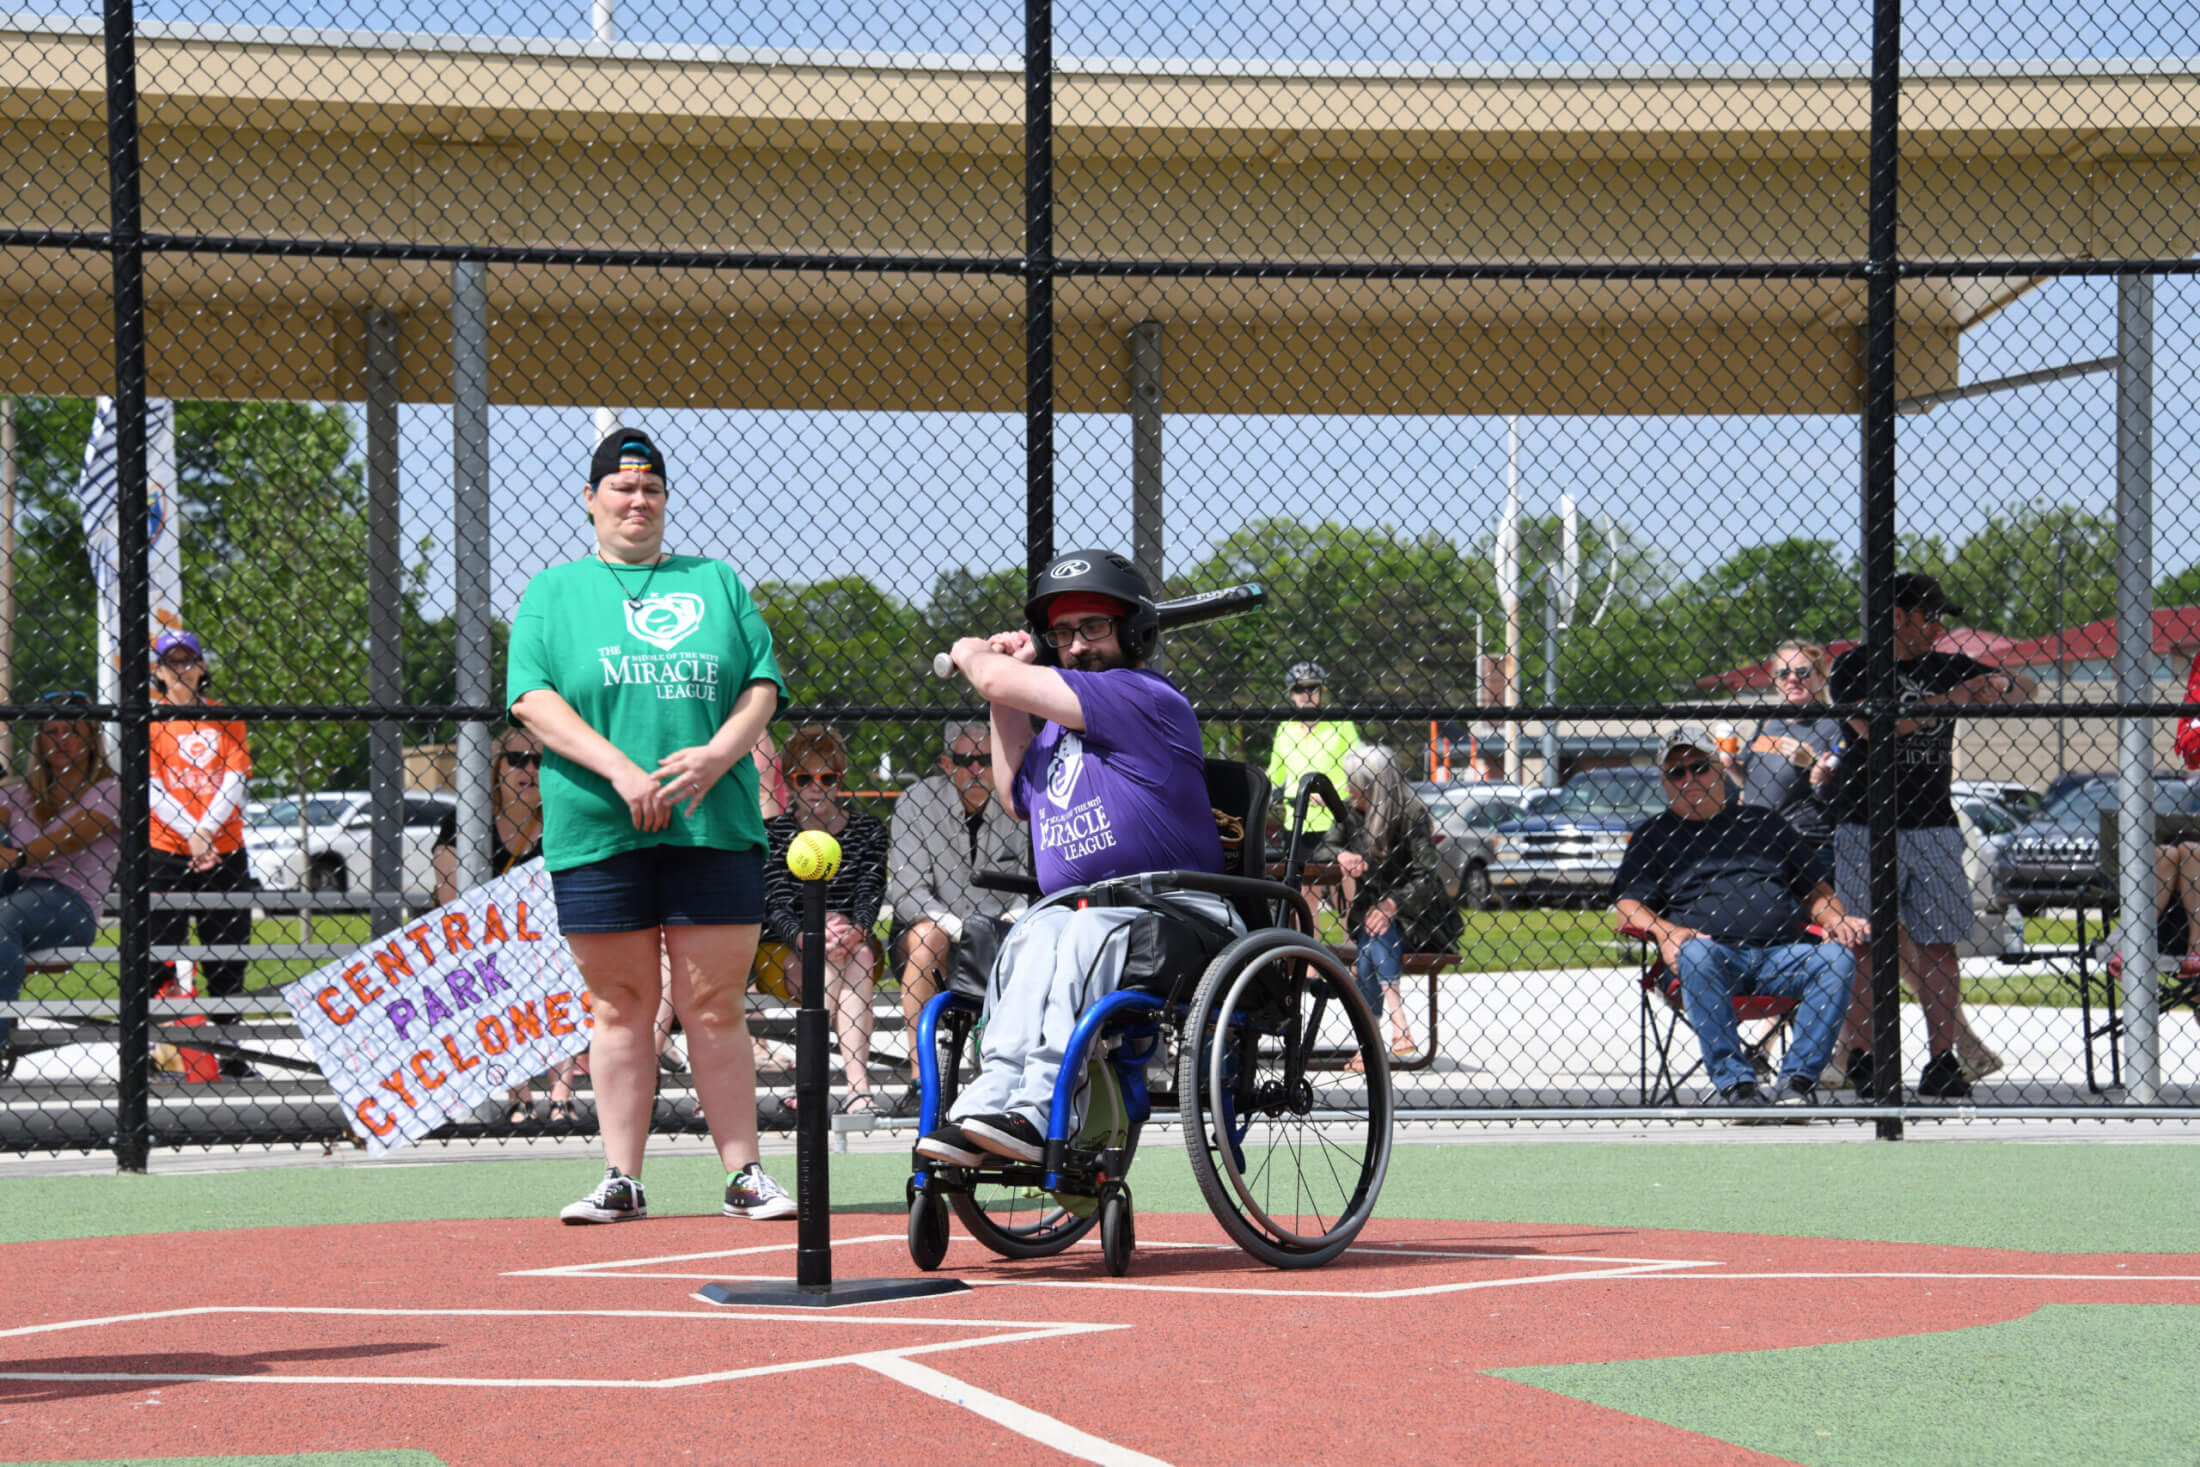 Photo of a man in a wheelchair hitting a baseball off a tee, as part of The Miracle League baseball program in Midland, Michigan.